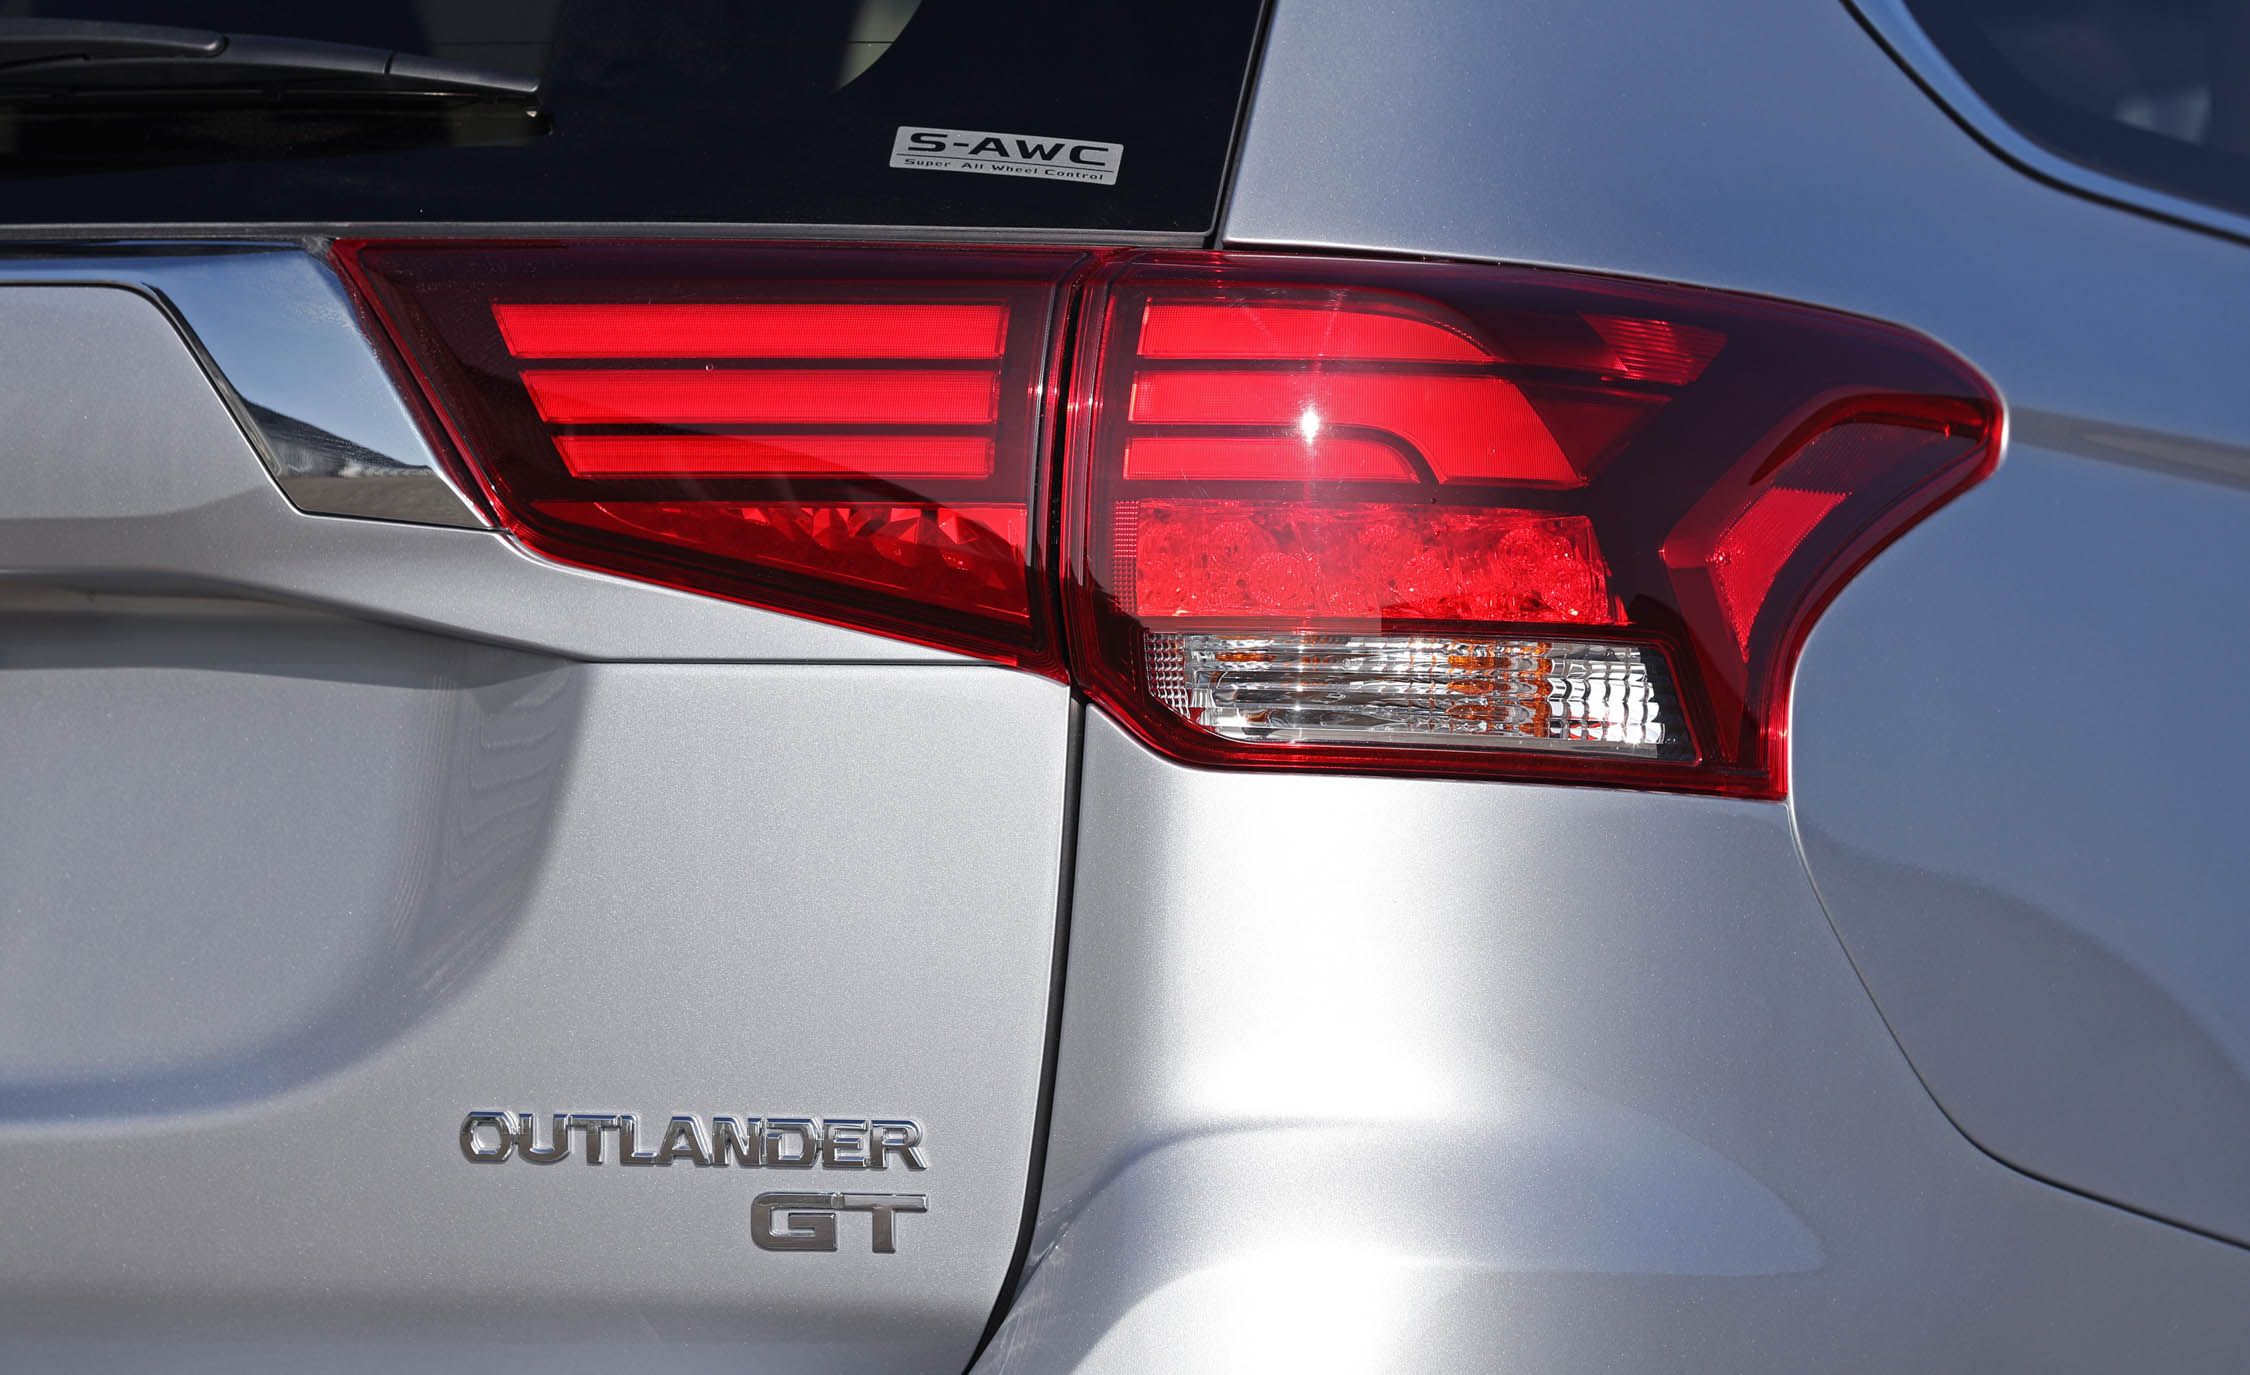 2017 Mitsubishi Outlander Gt Exterior View Taillight (View 23 of 34)